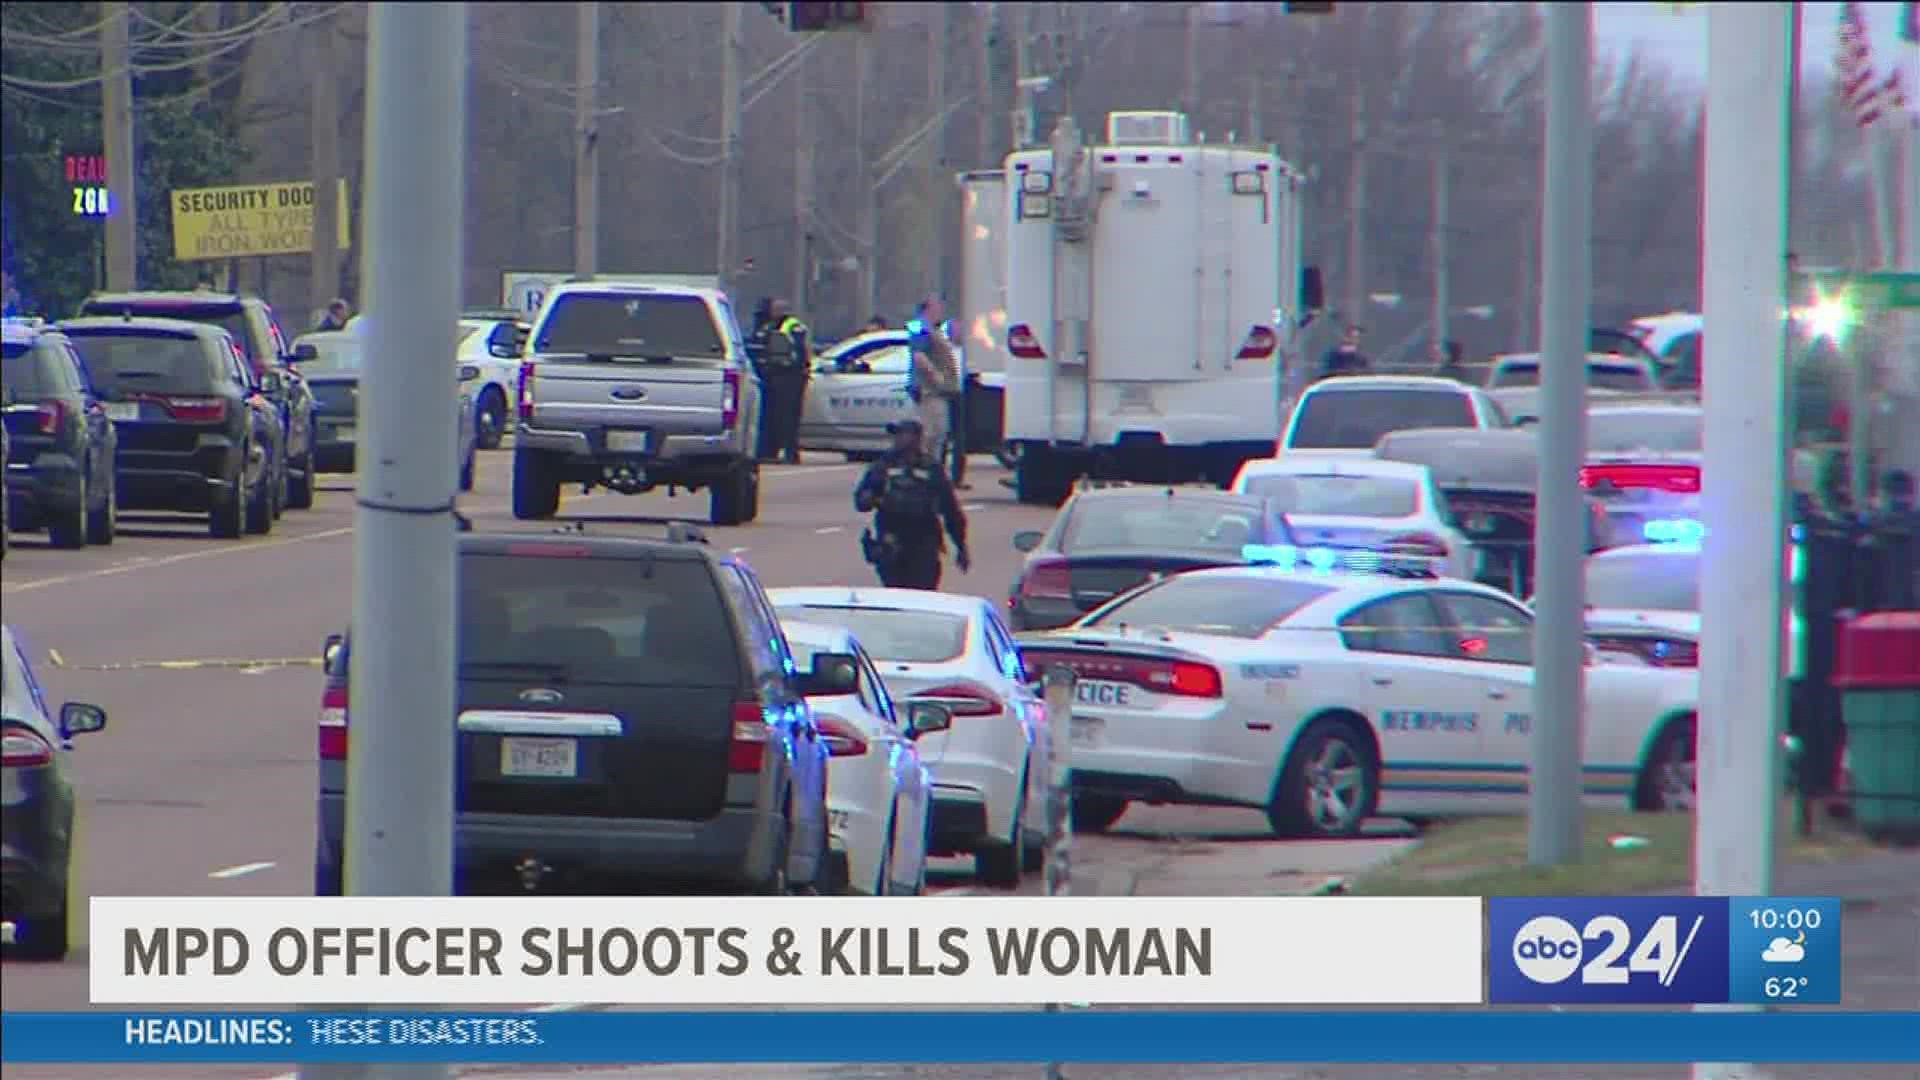 The Tennessee Bureau of Investigation was called in to investigate as Memphis Police said a woman was shot and killed by an officer.